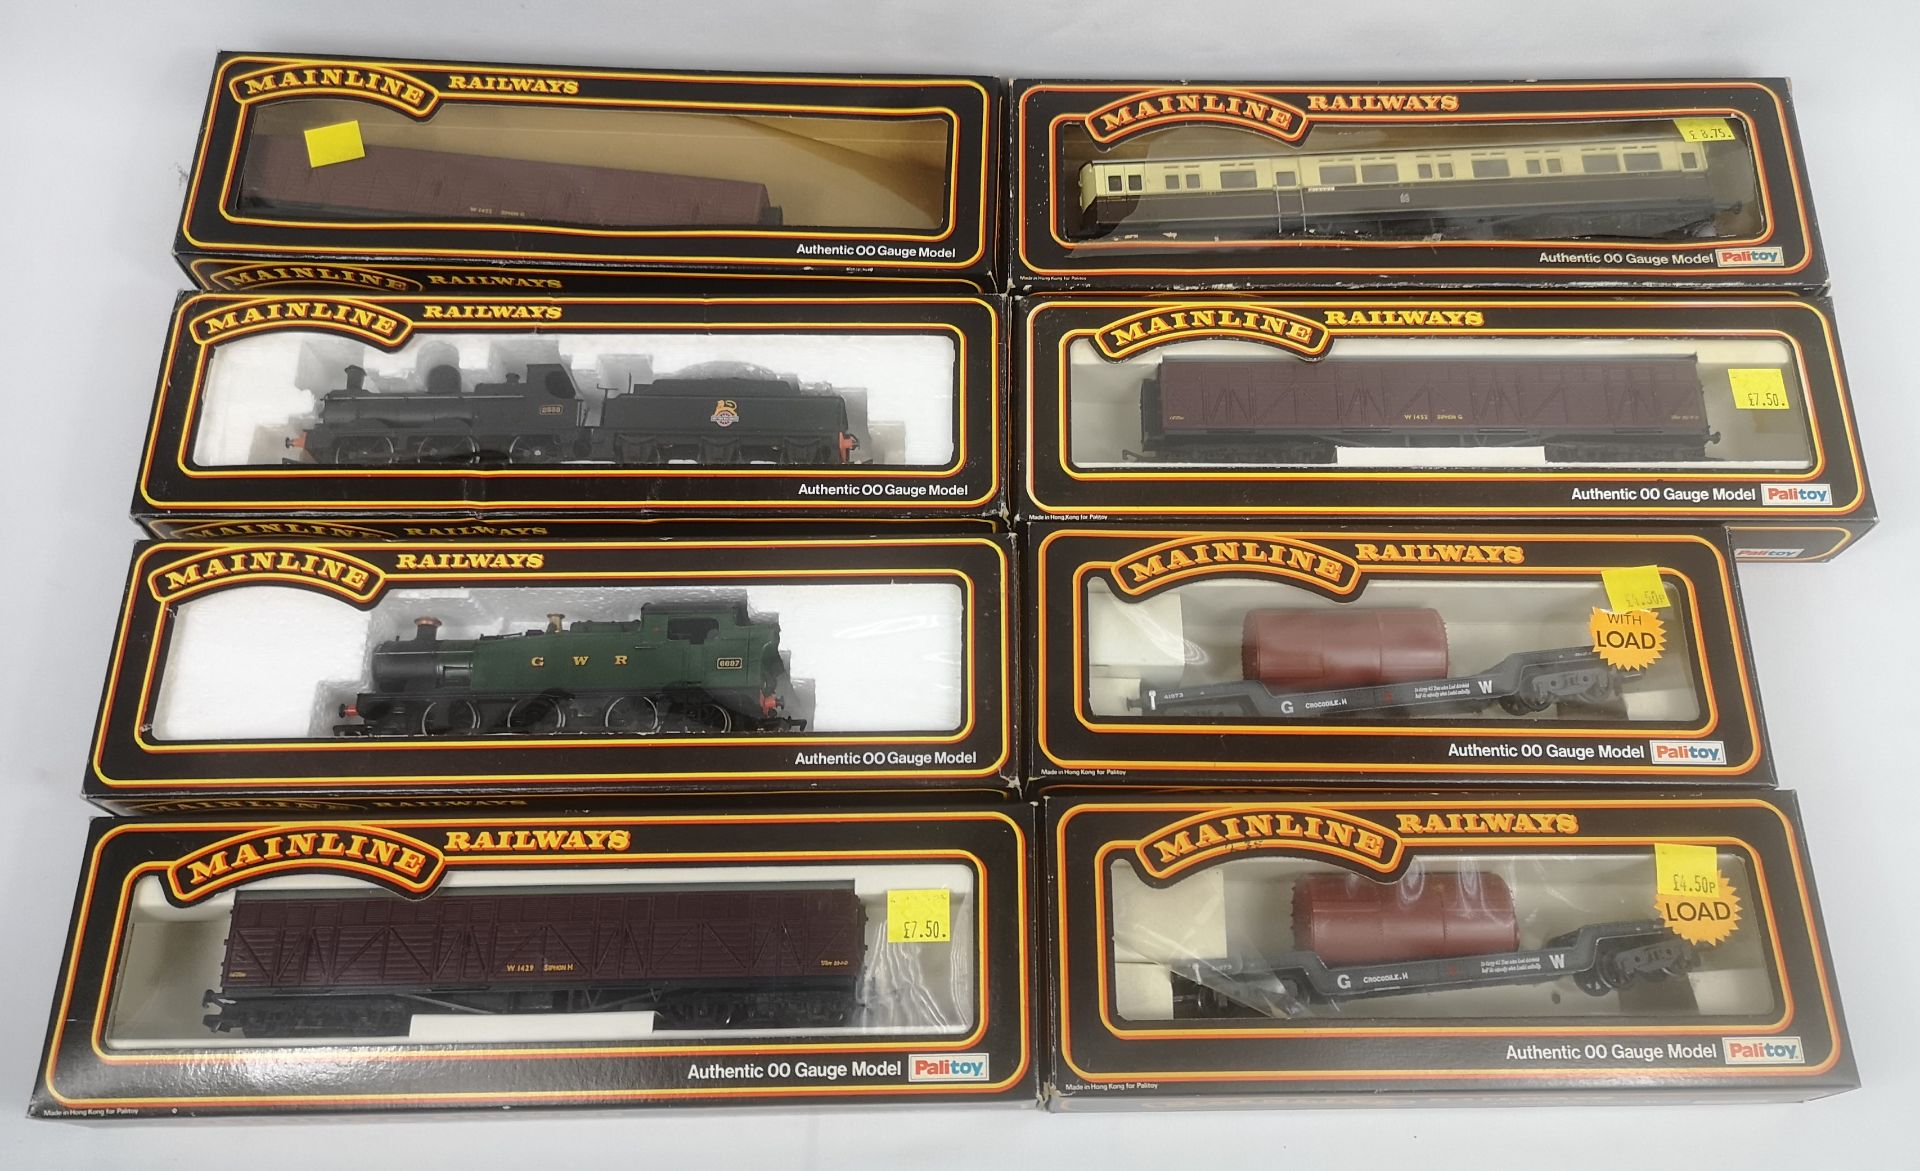 Two boxed Mainline Railways 00 gauge locomotives and six carriages